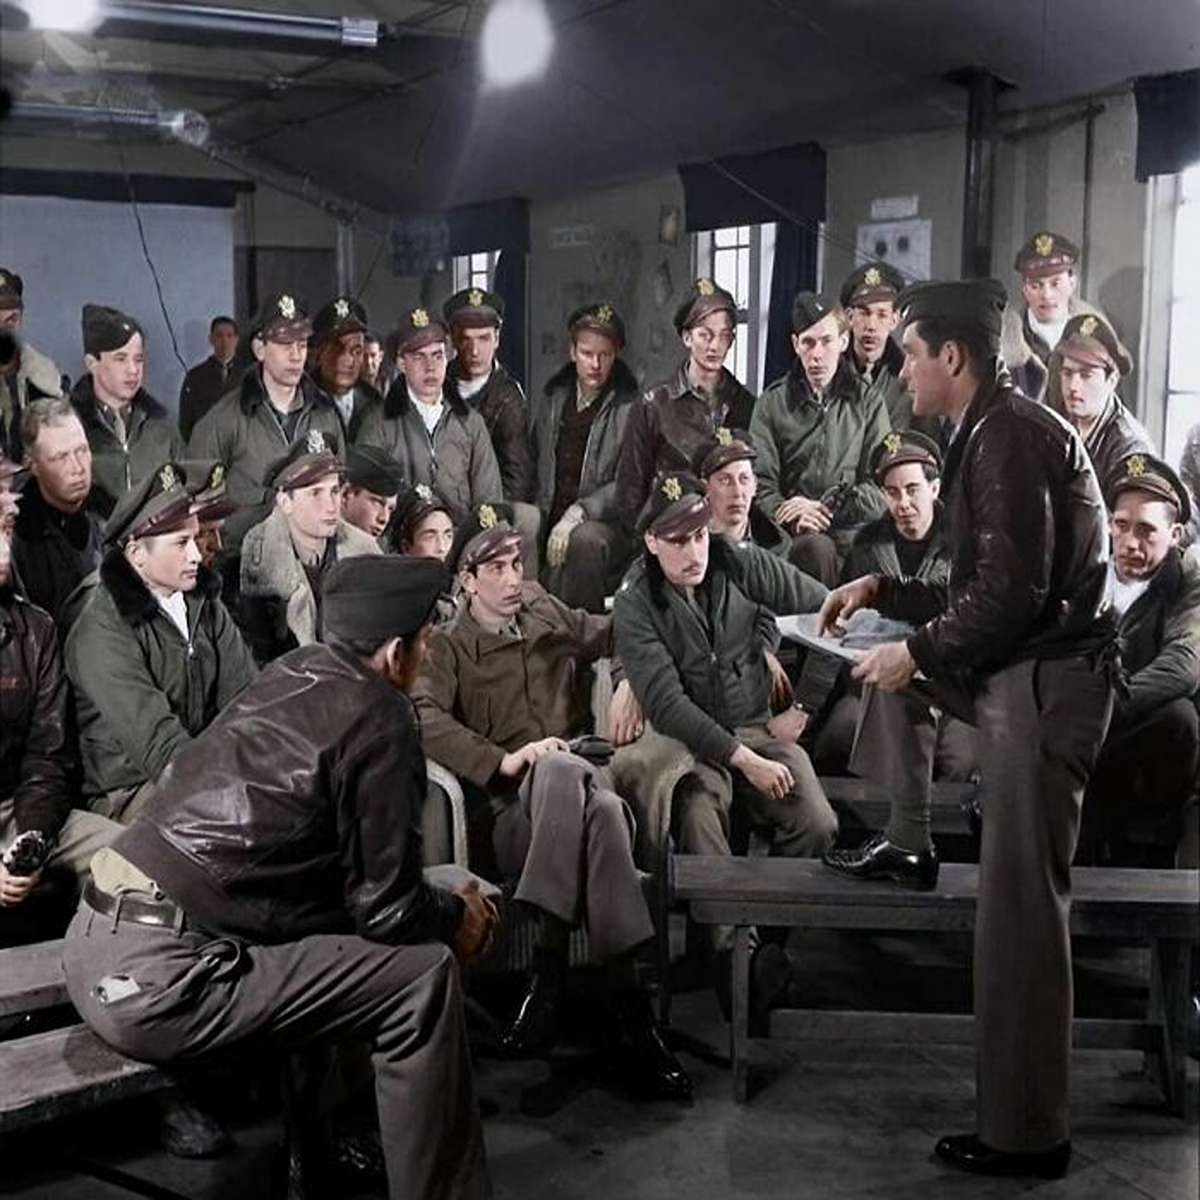 Colonel Donald Blakeslee Of 4th Fighter Group Of The United States Army Air Force Briefing A Group Of Pilots During Wwii. Photograph Taken In England In April, 1944